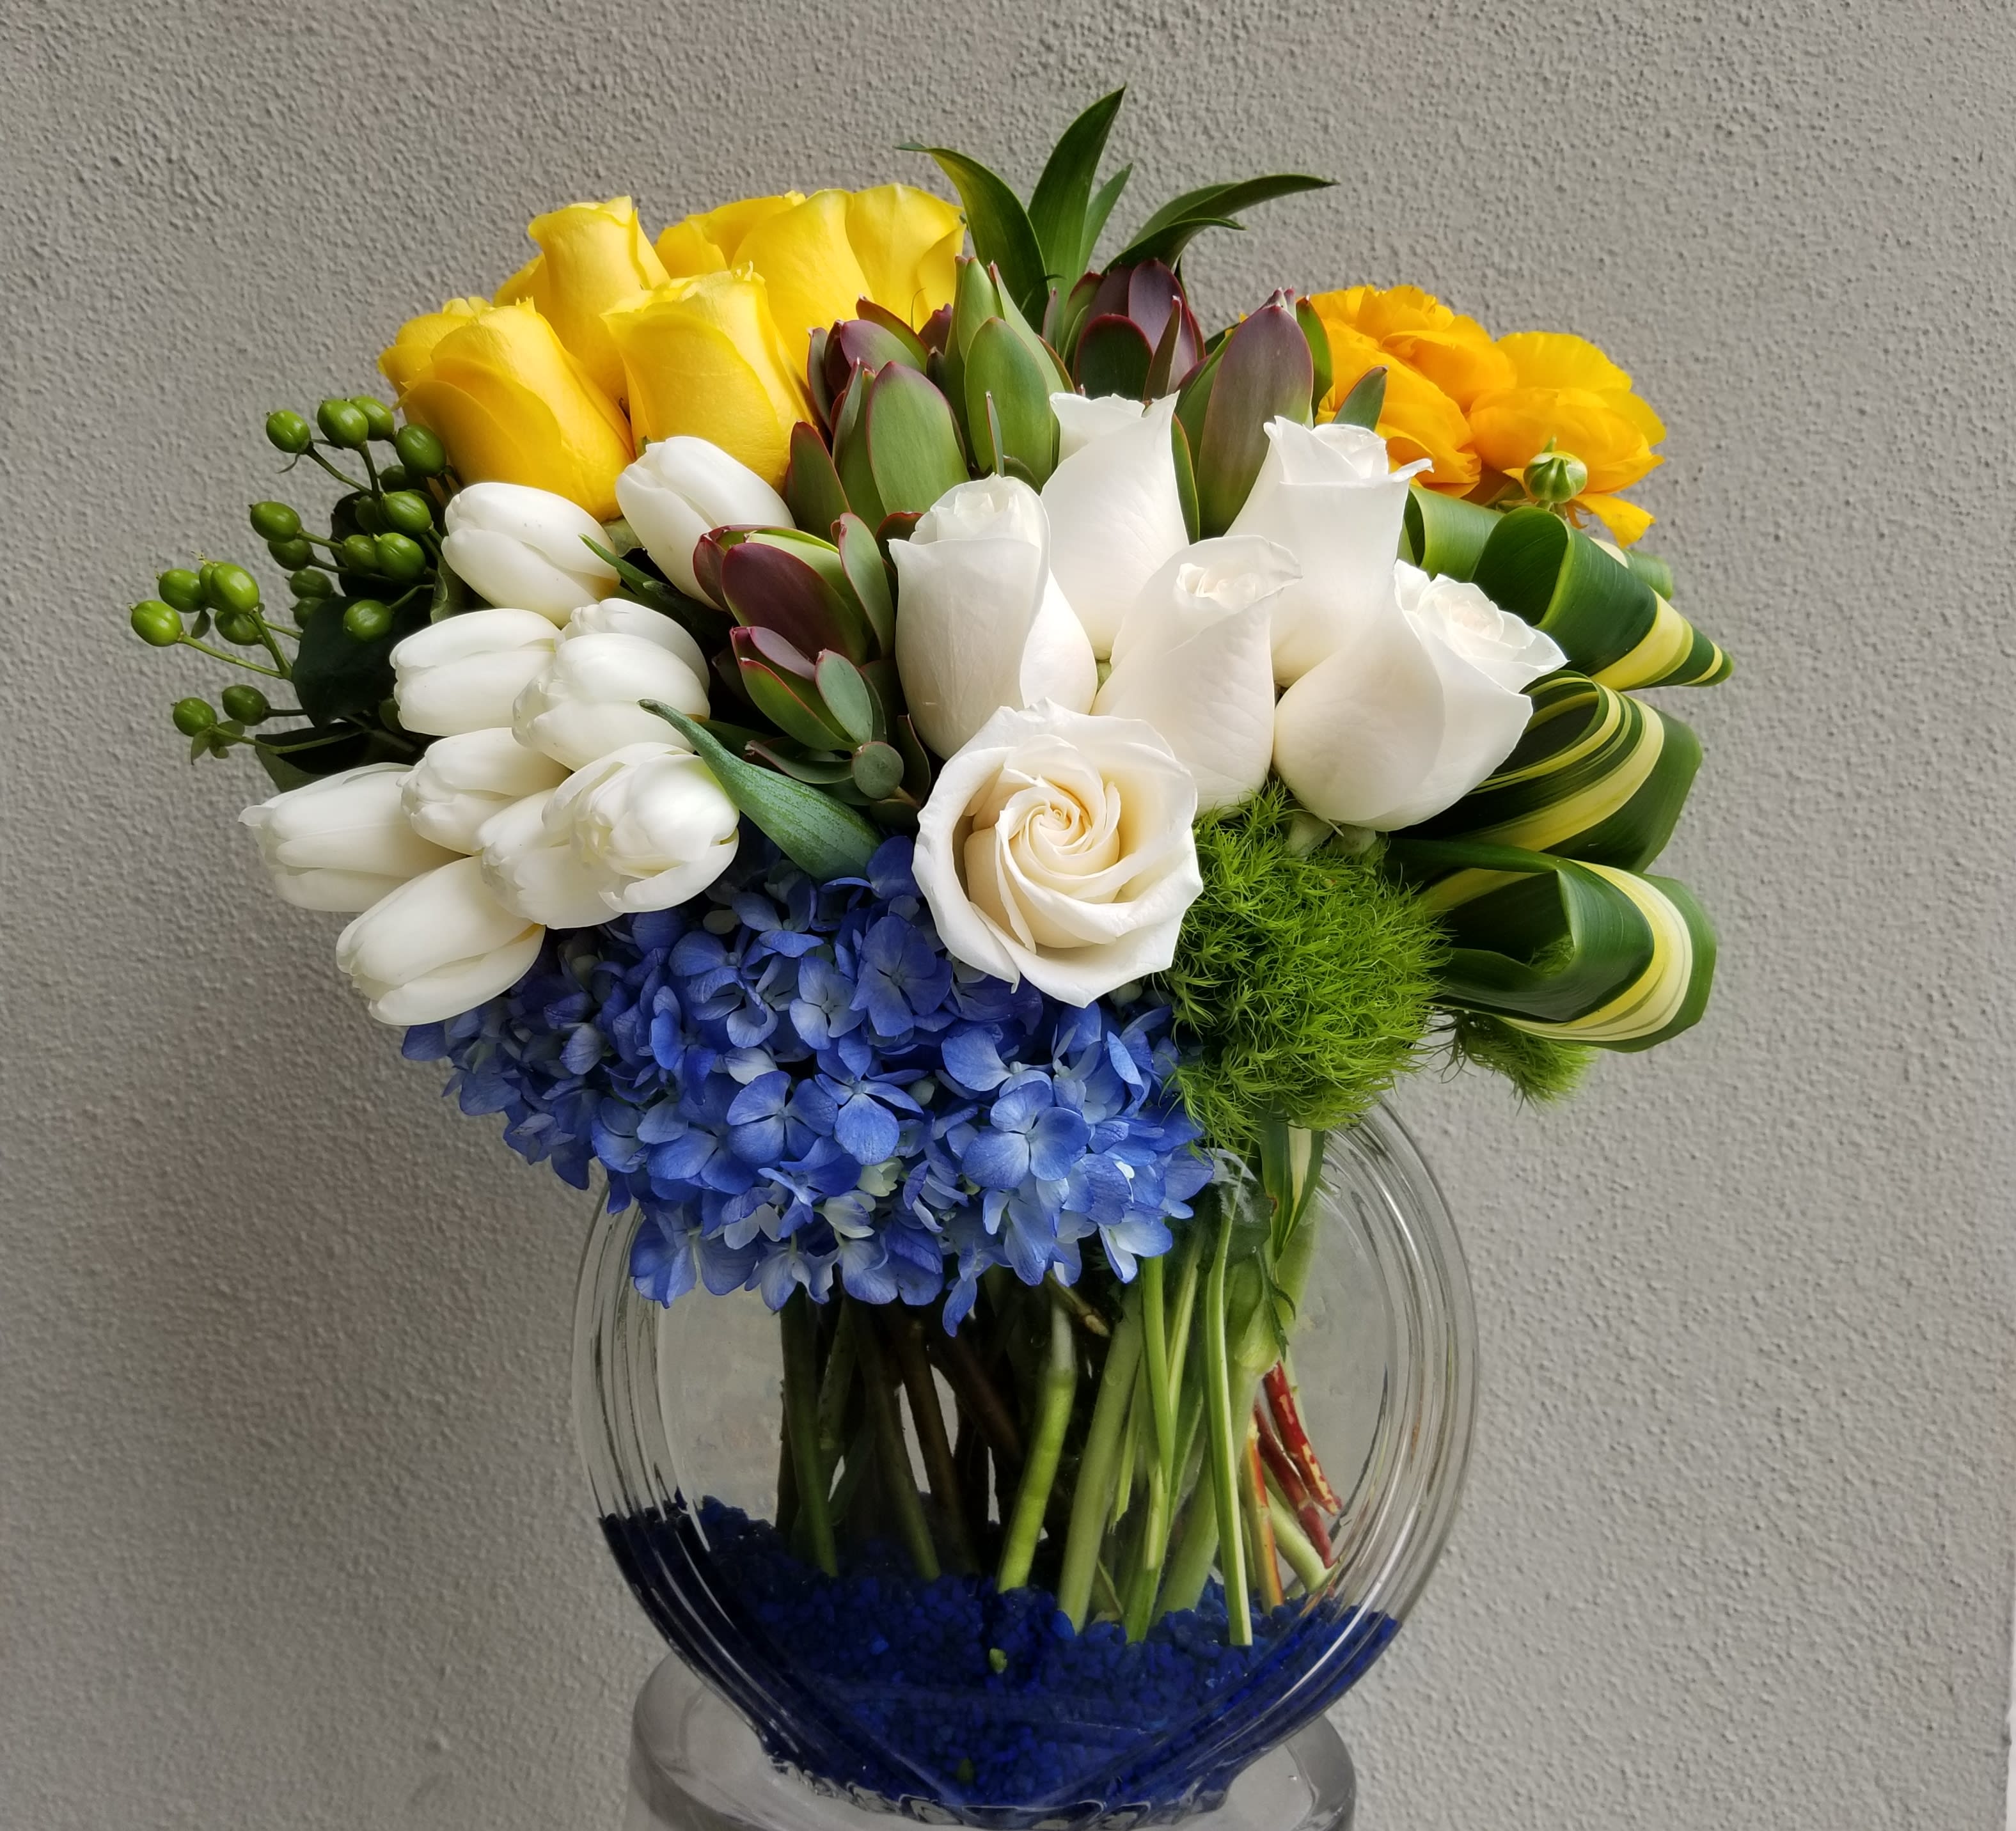 Sunrise - Flat bowl composed of white, blue and yellow blooms such as roses, tulips, hydrangeas, and ranunculus.